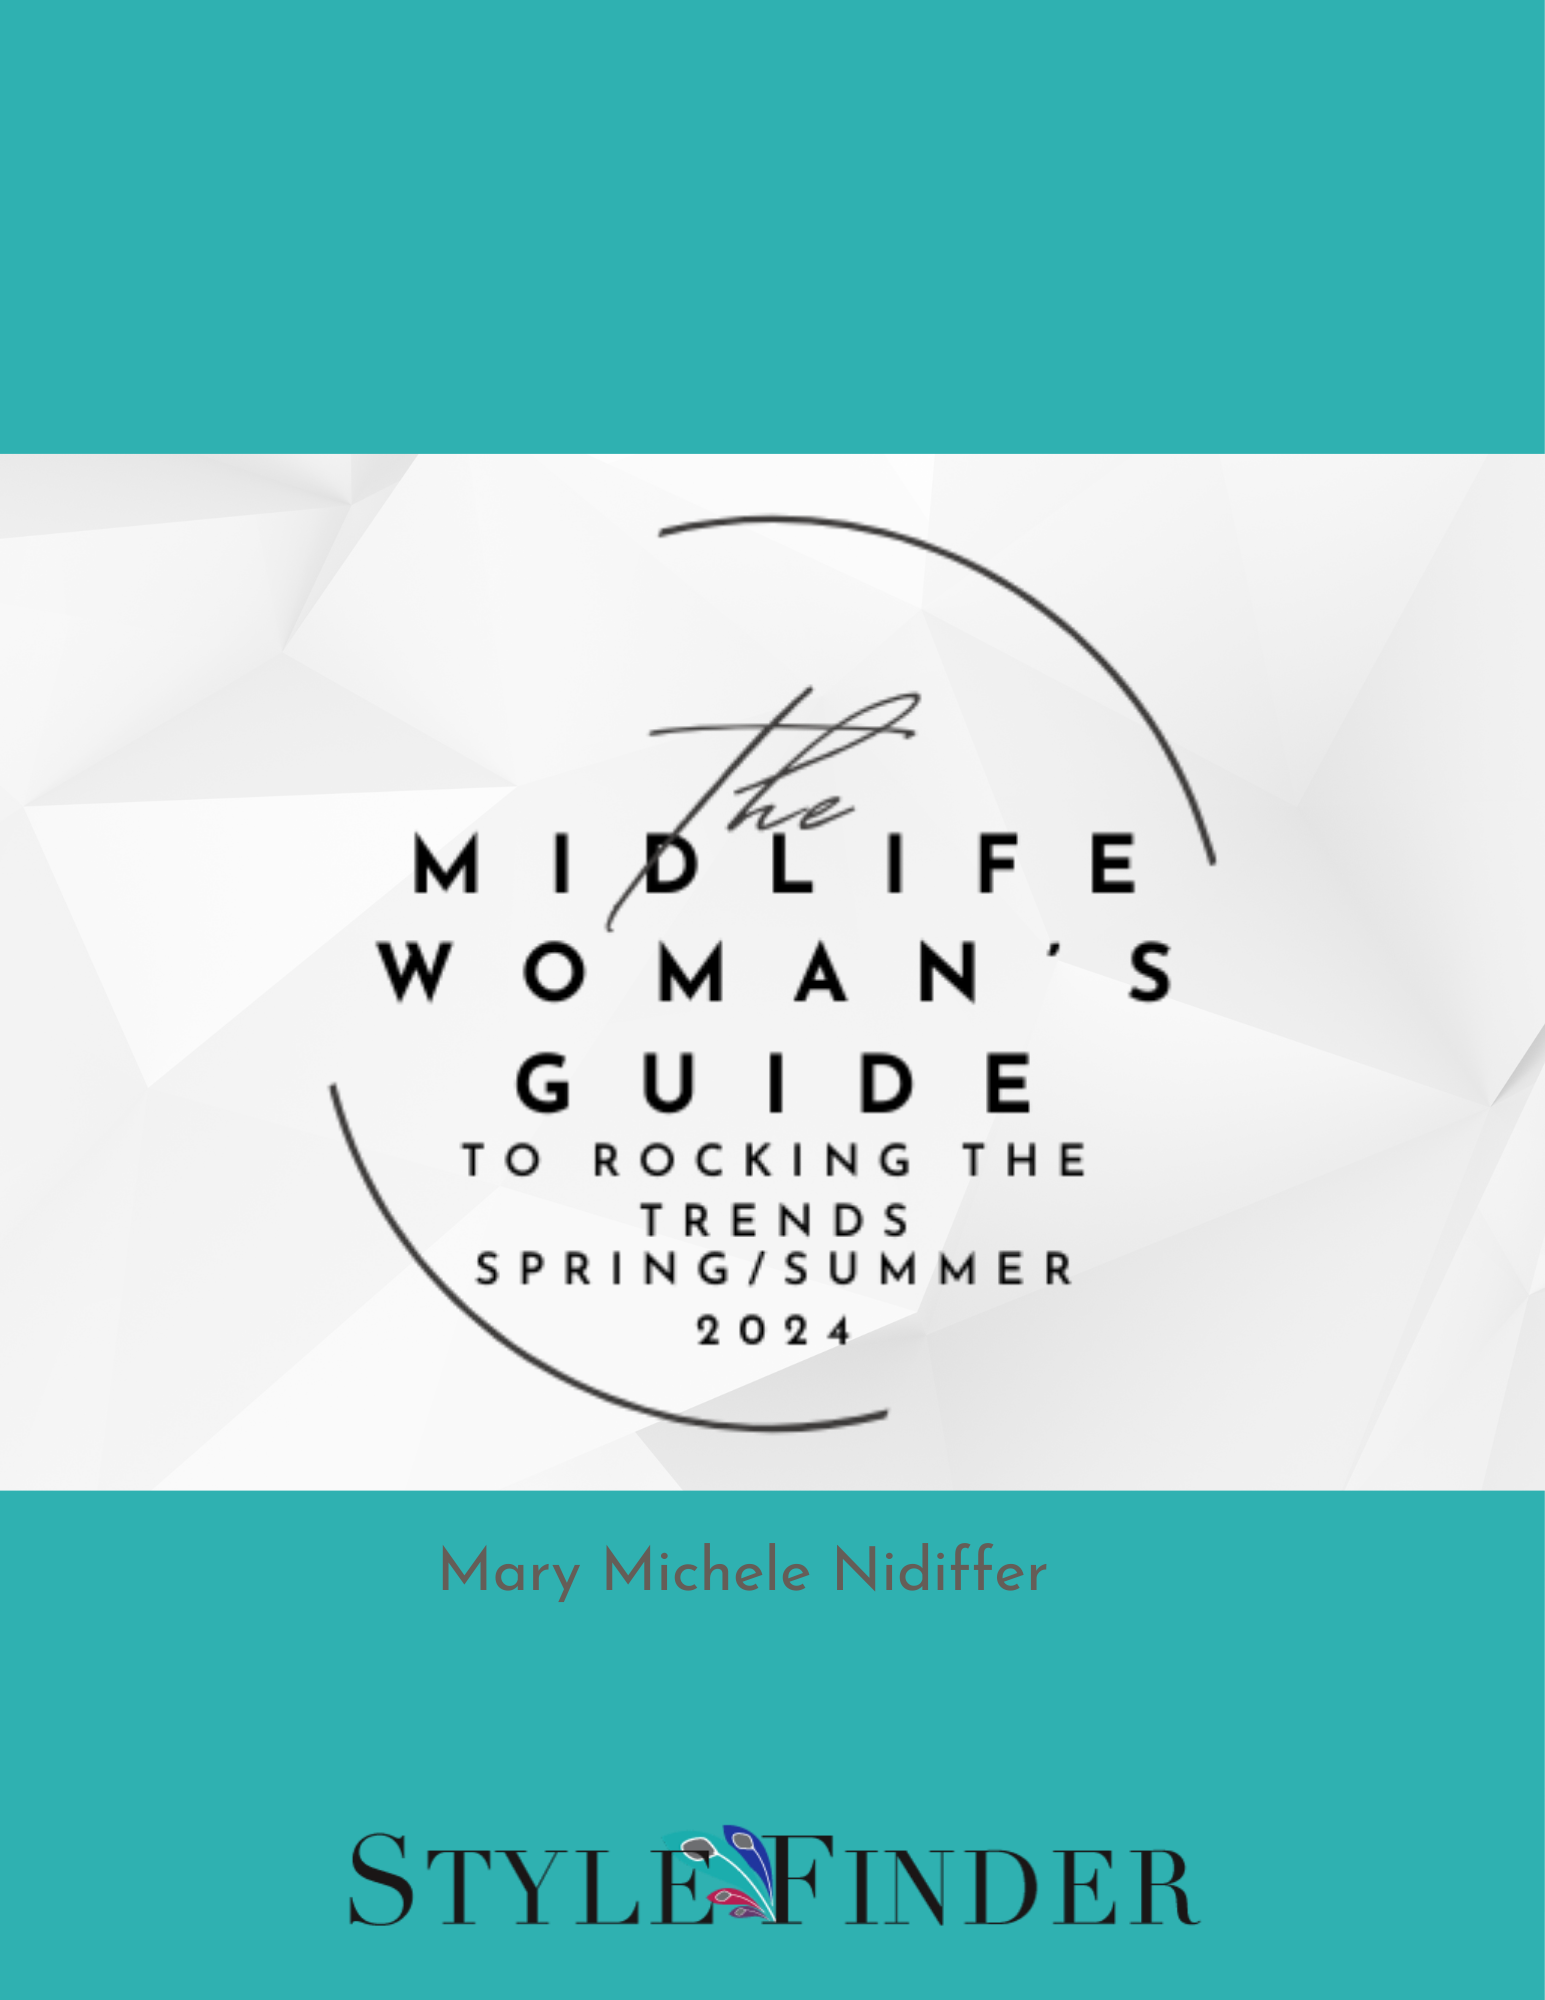 The Midlife Woman's Guide to Rocking the Trends Spring/Summer 2024 E-book